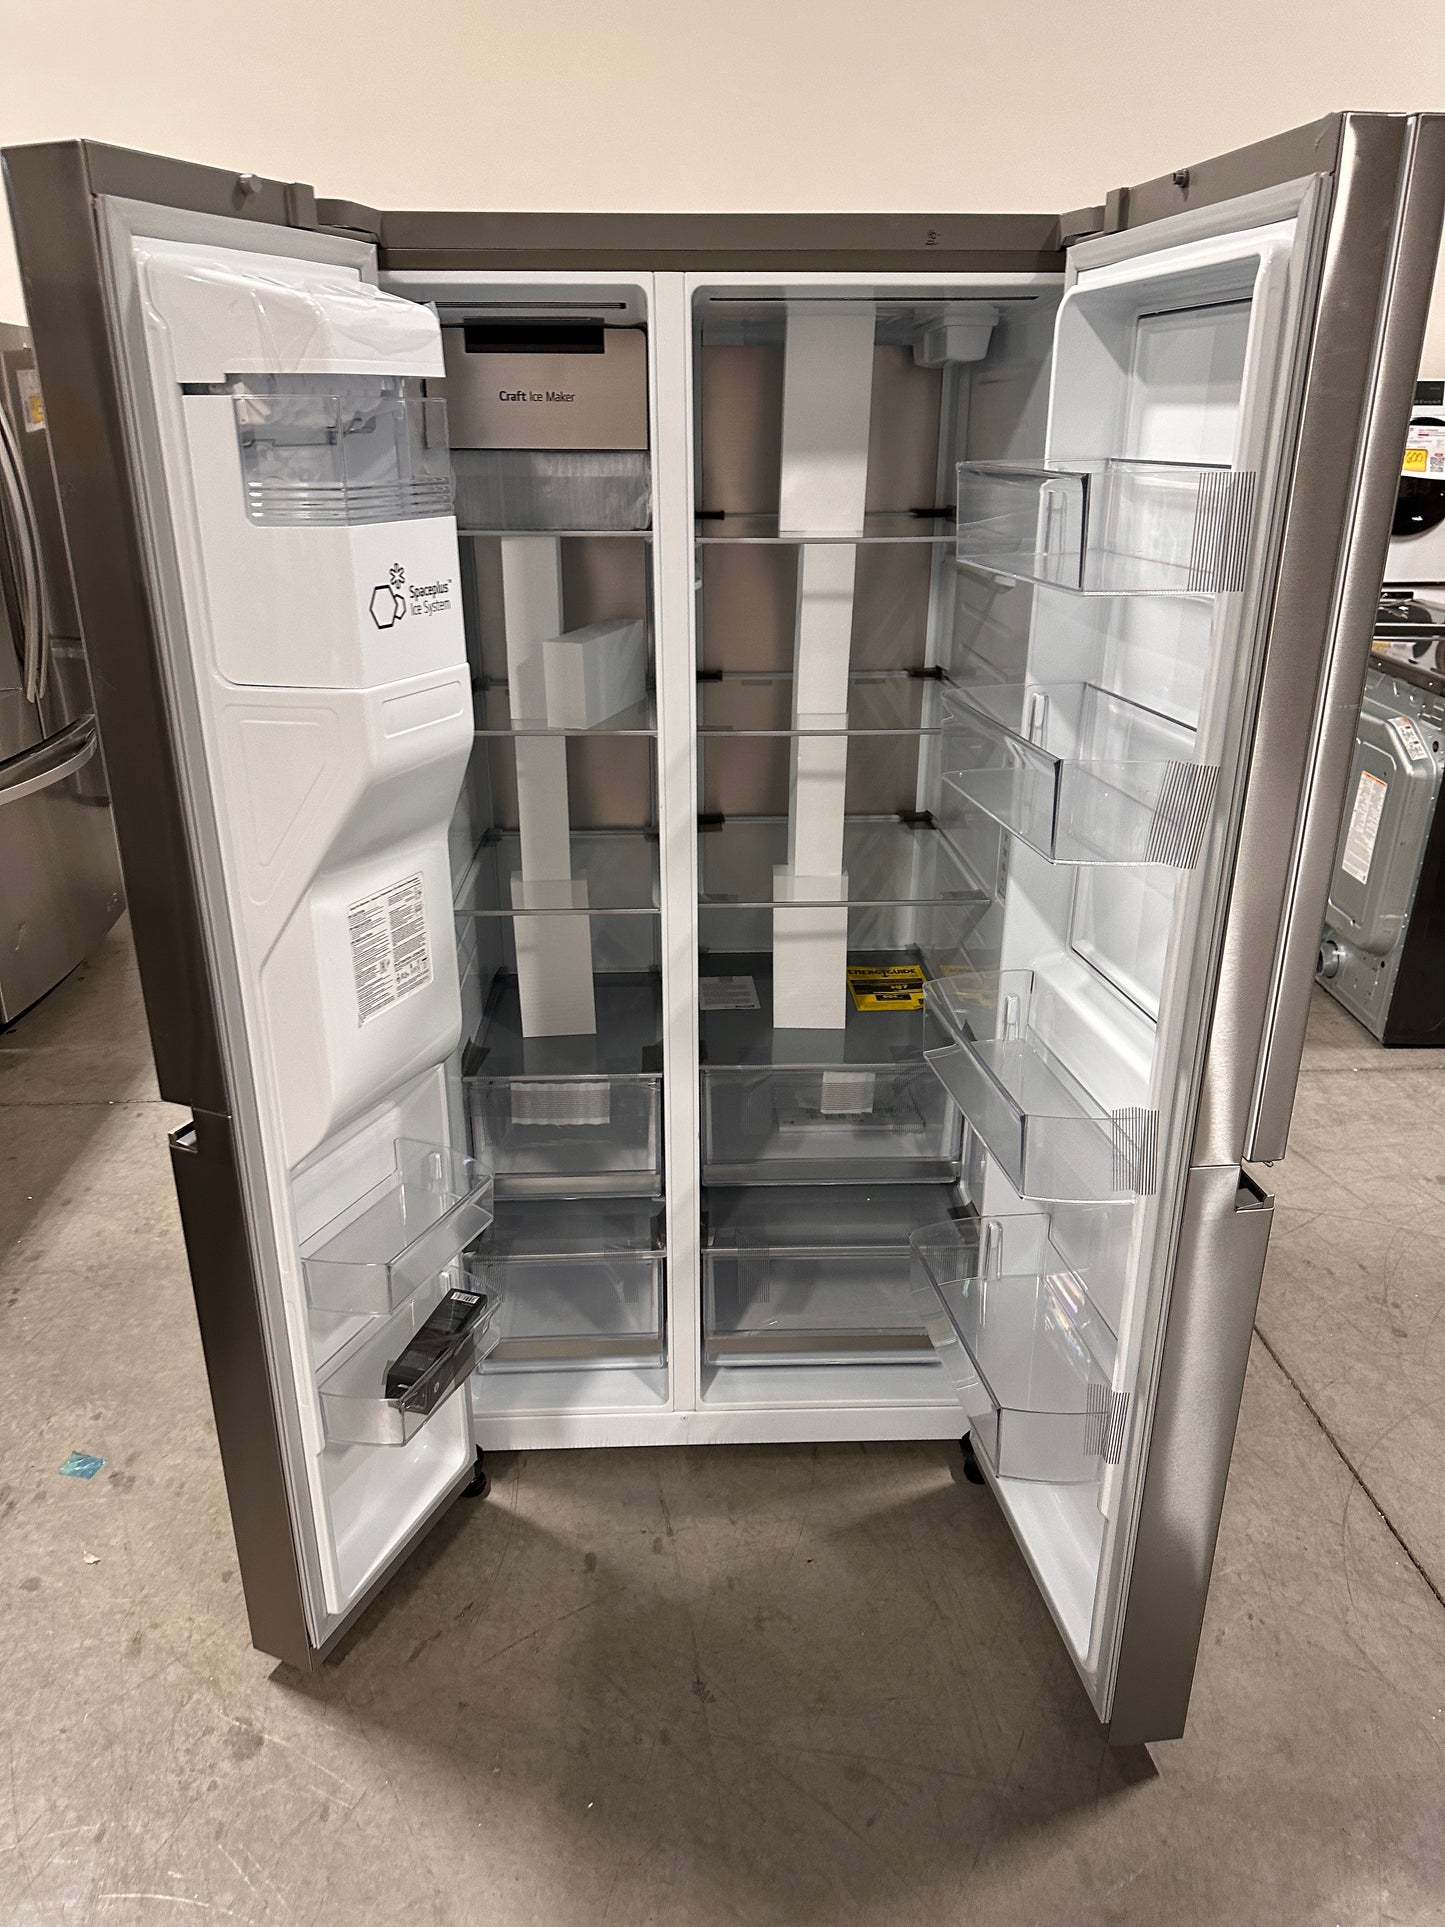 GREAT NEW LG SIDE BY SIDE REFRIGERATOR Model:LRSDS2706S  REF12905